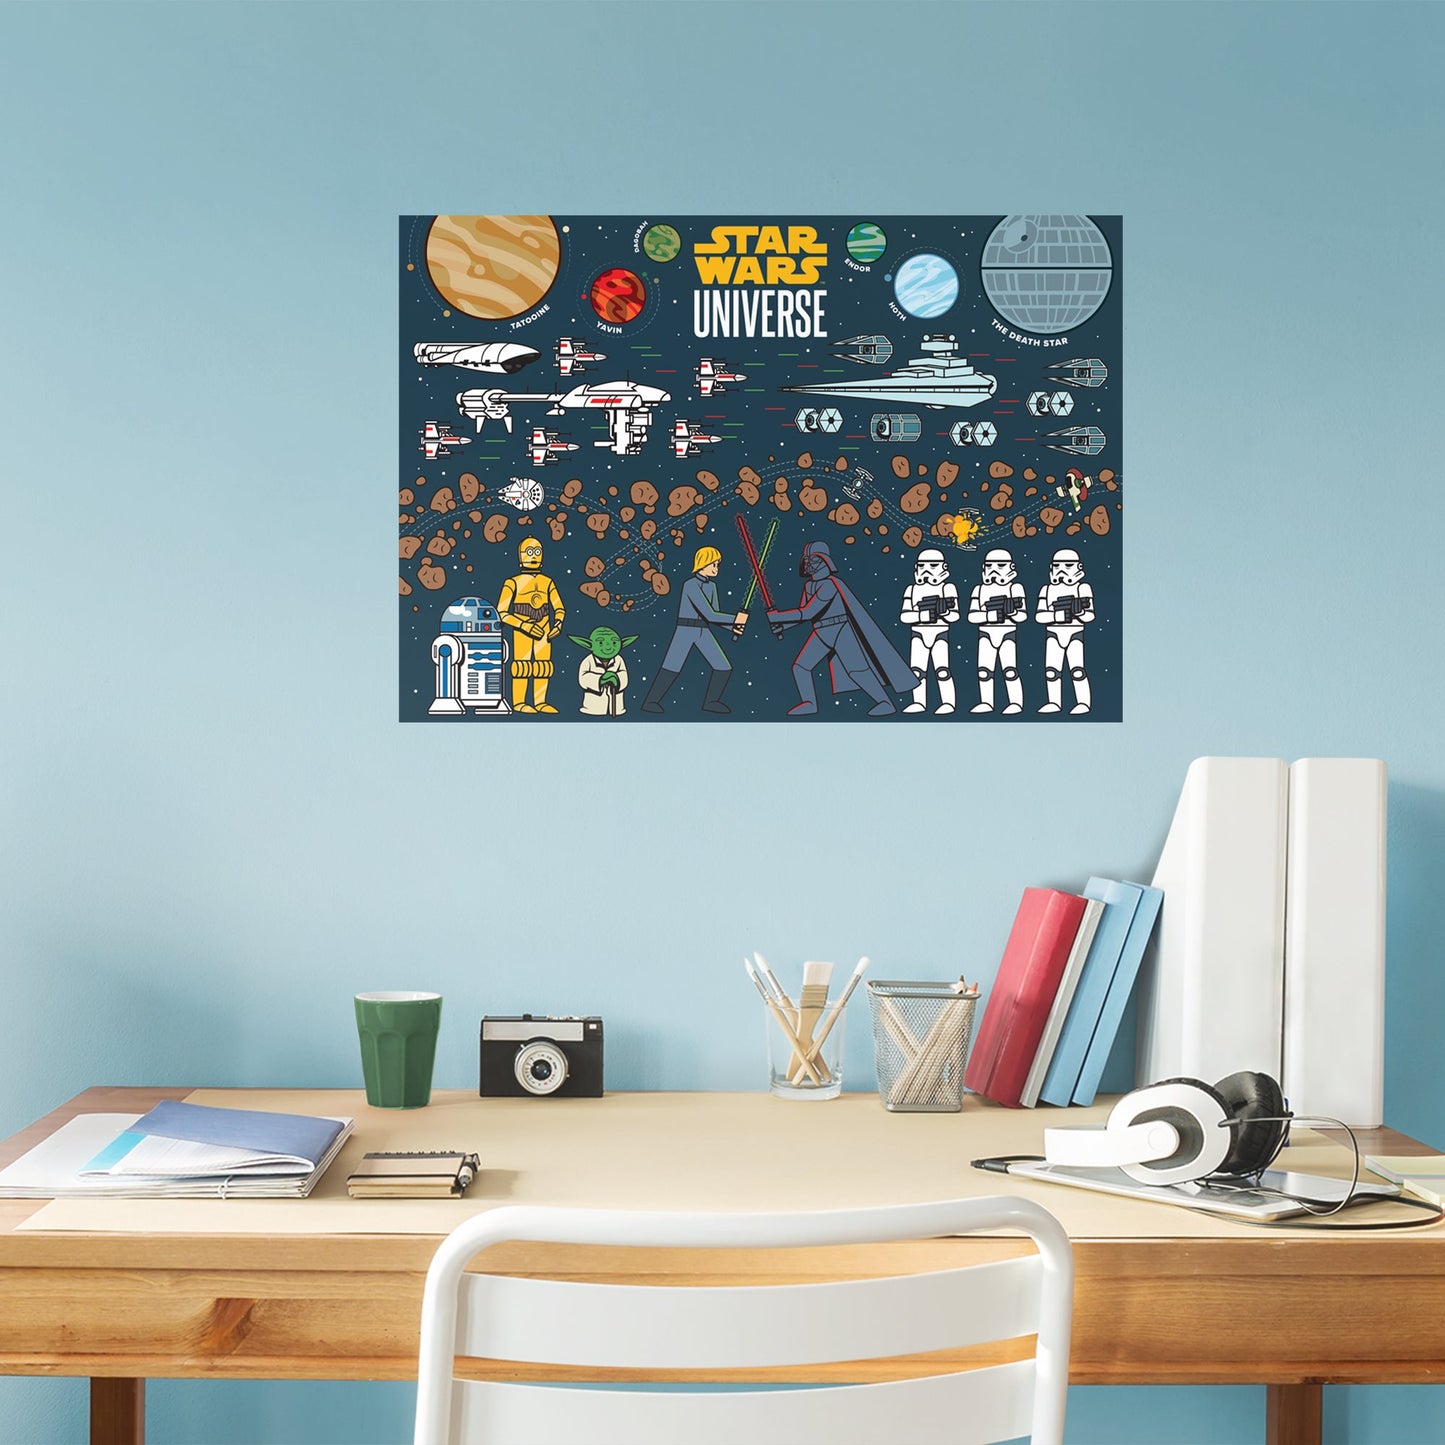 Star Wars Universe Poster - Officially Licensed Star Wars Removable Adhesive Decal